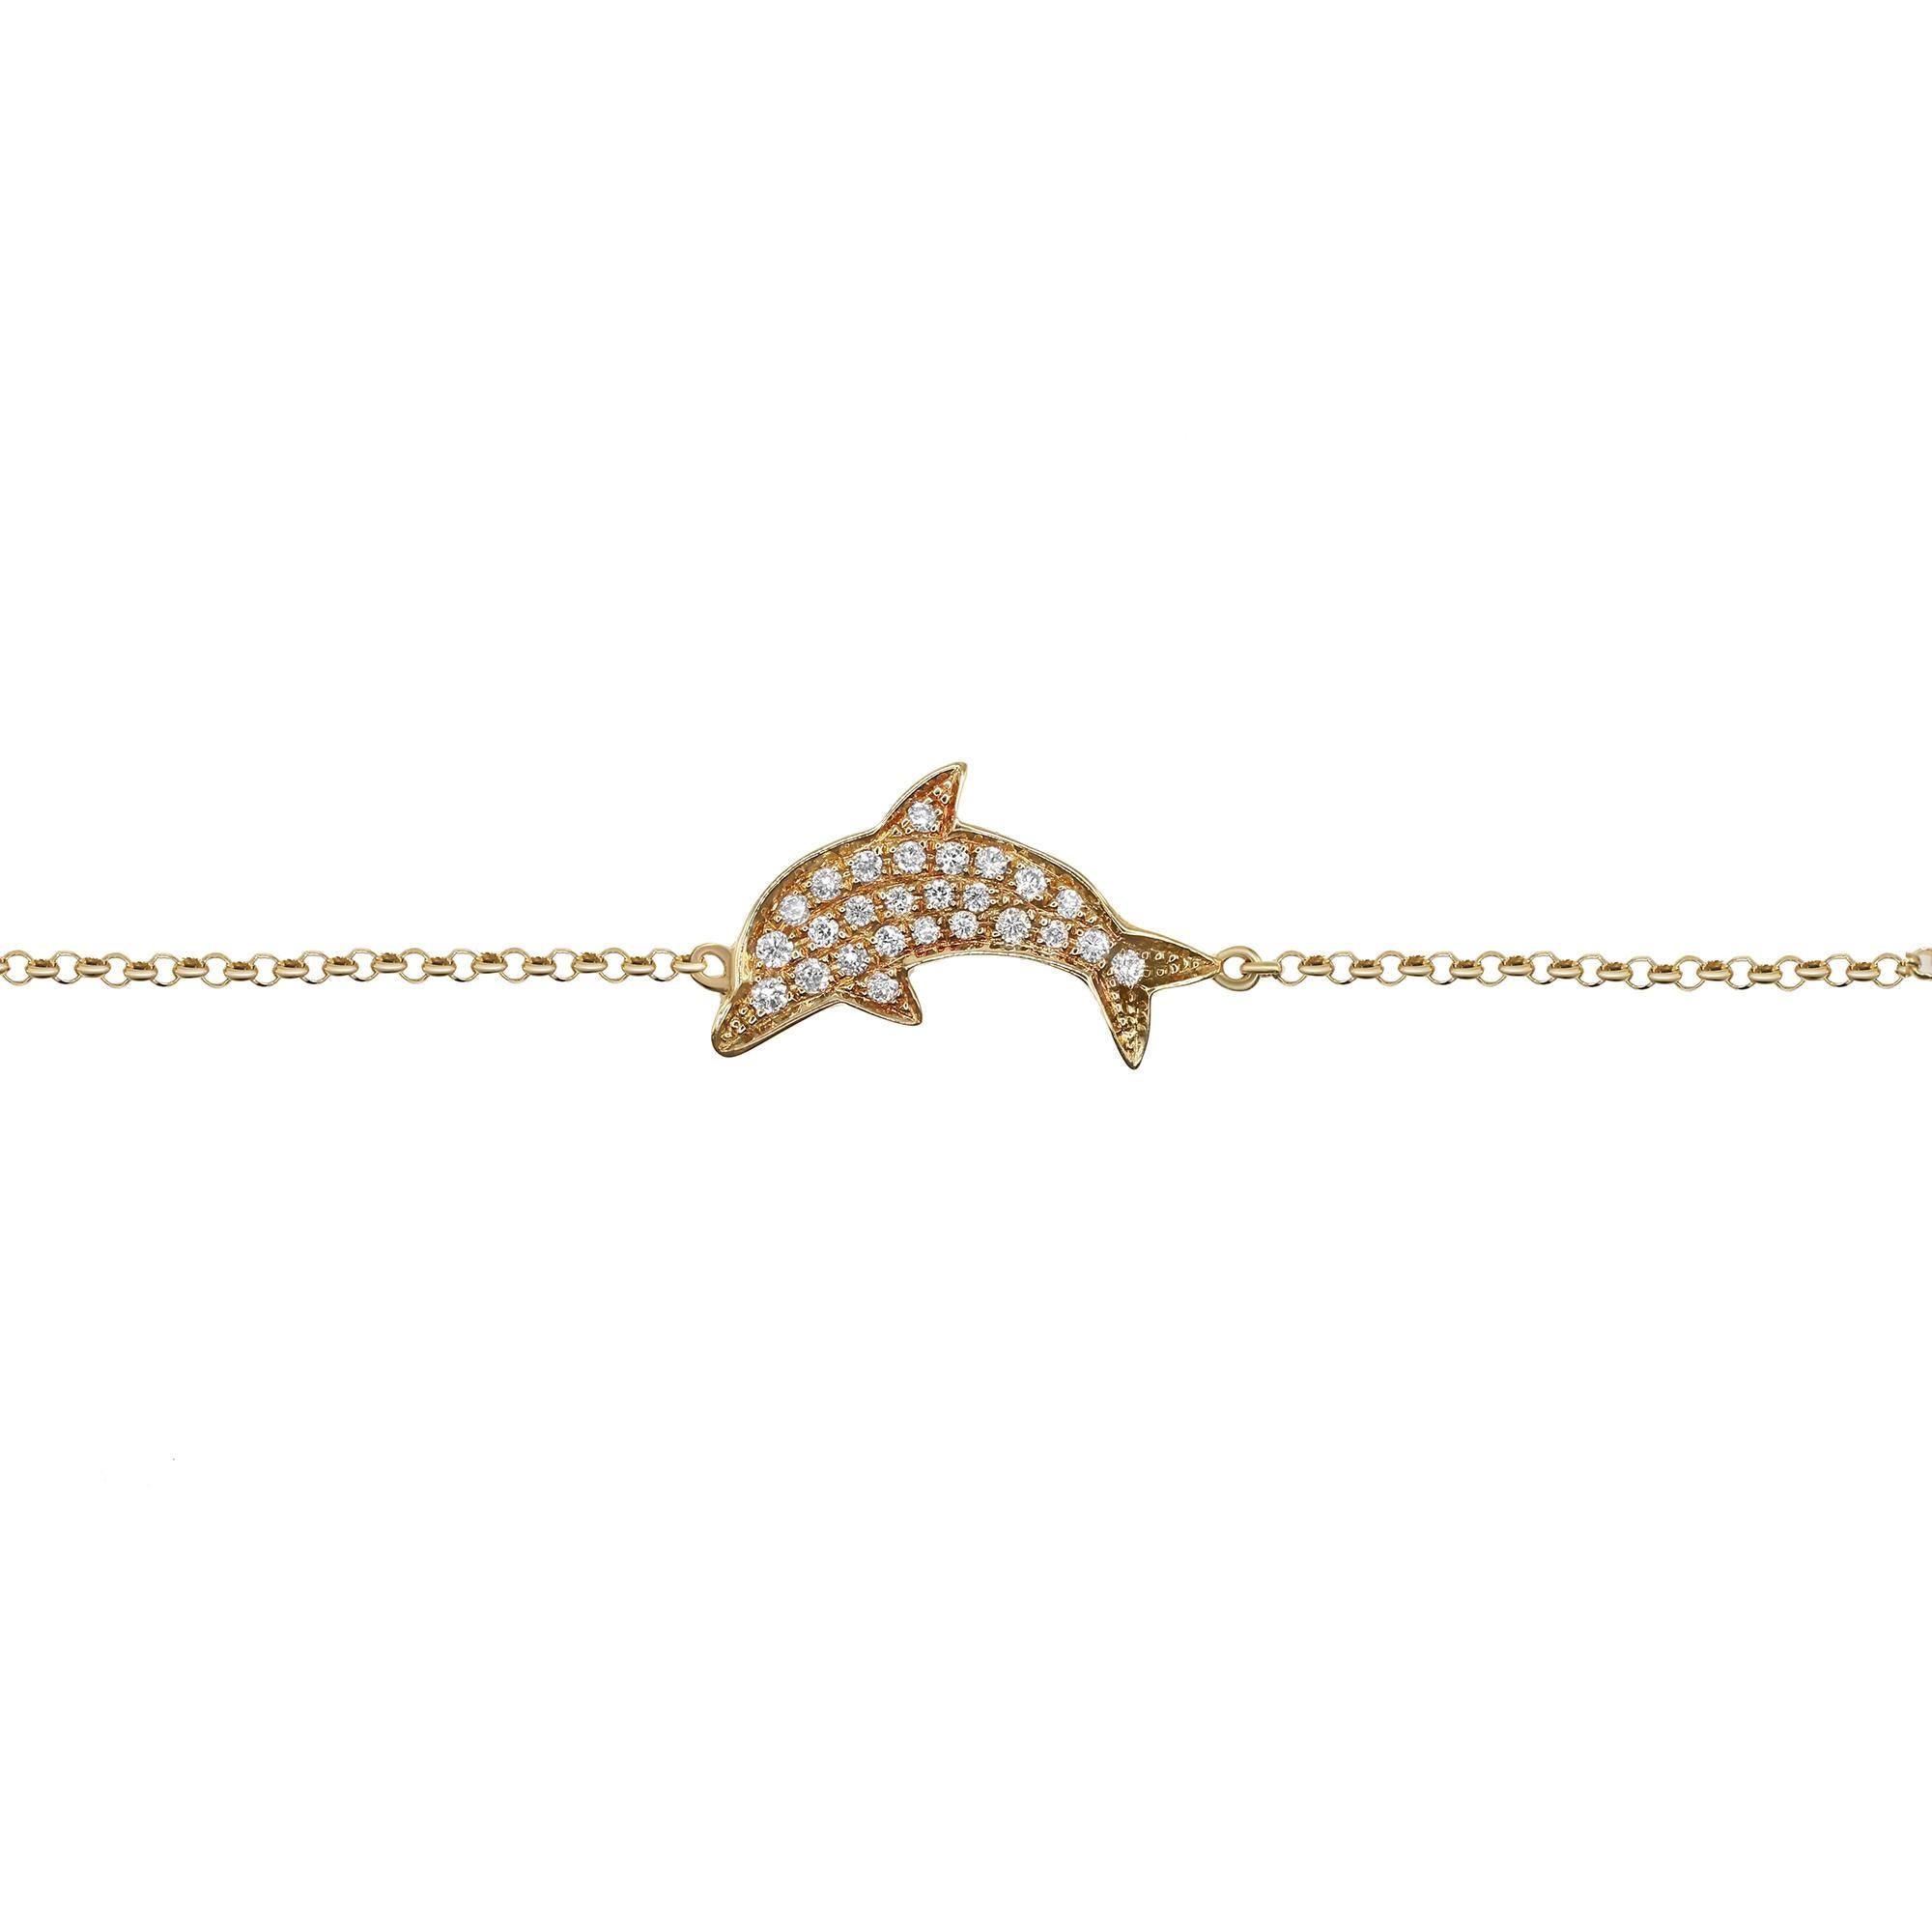 A simple diamond dolphin chain bracelet in 18k yellow gold. Tiny dolphin is set with 0.20cttw of tiny round cut diamonds. Diamond color I and SI-I clarity. Bracelet Length: 7.25 inches. Adjustable chain. Comes with a presentable gift box and